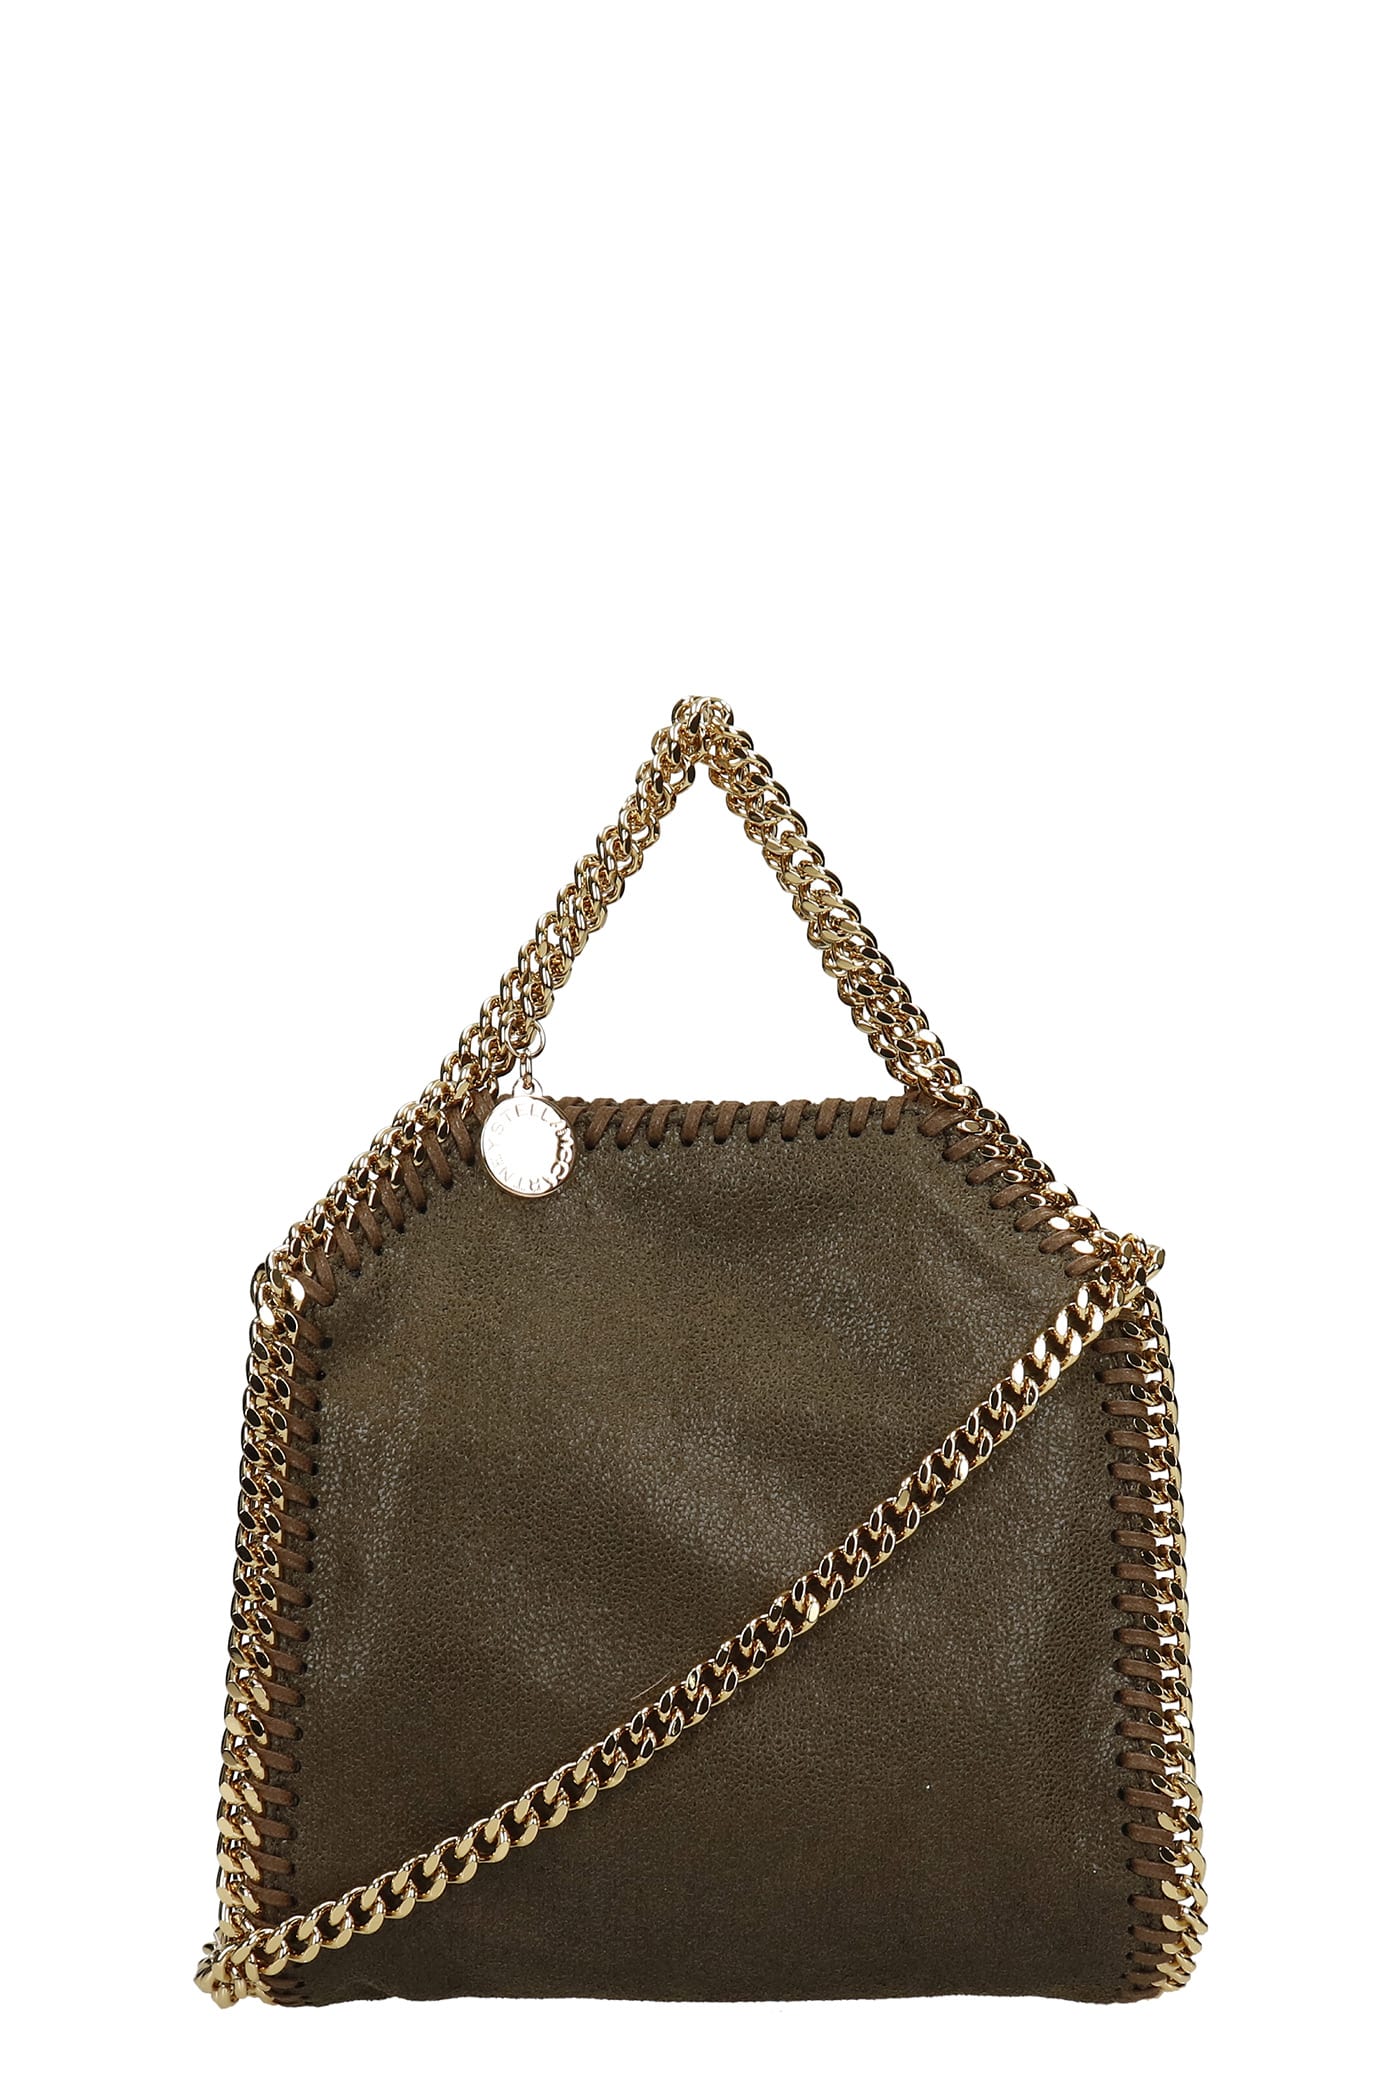 Stella McCartney Falabella Tiny Tote In Green Faux Leather